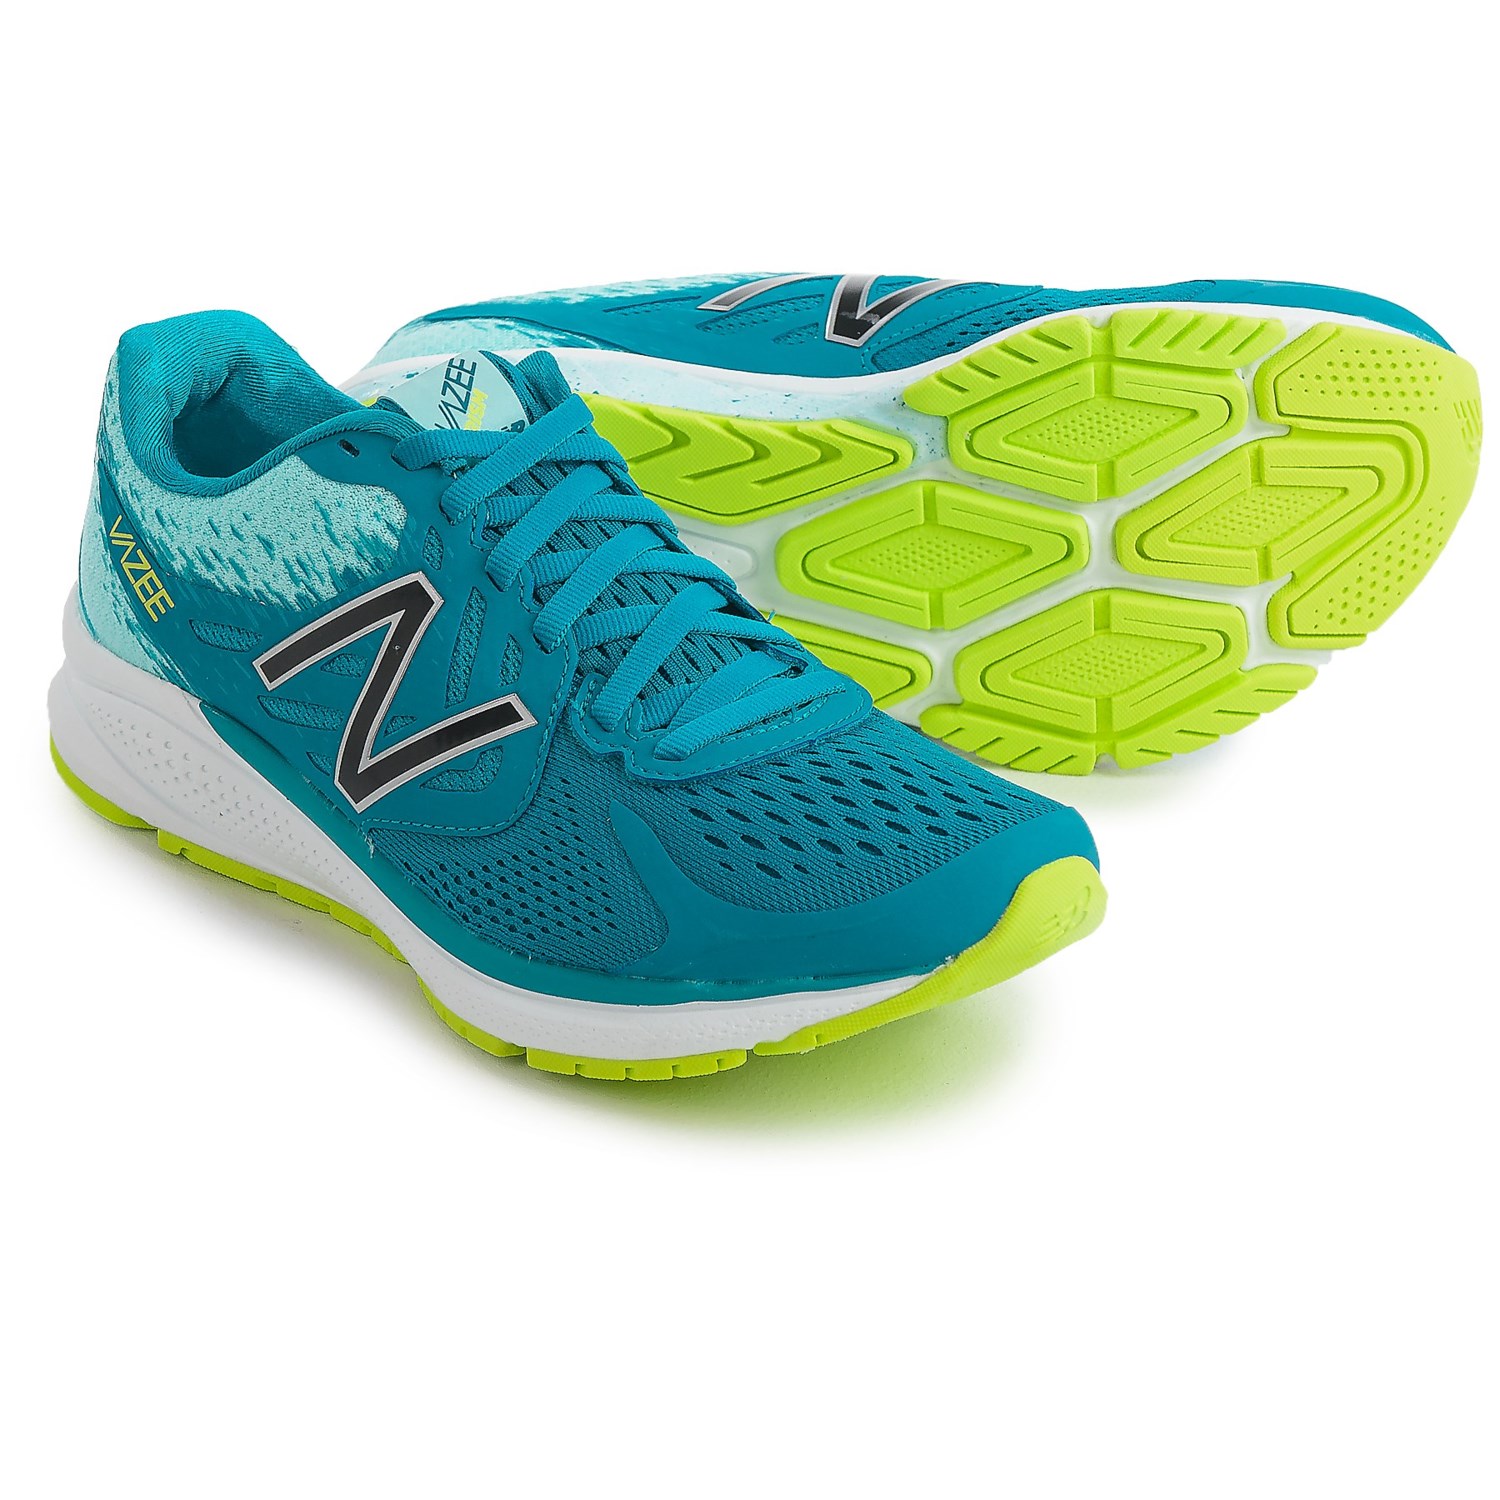 New Balance Vazee Prism V2 Running Shoes (For Women